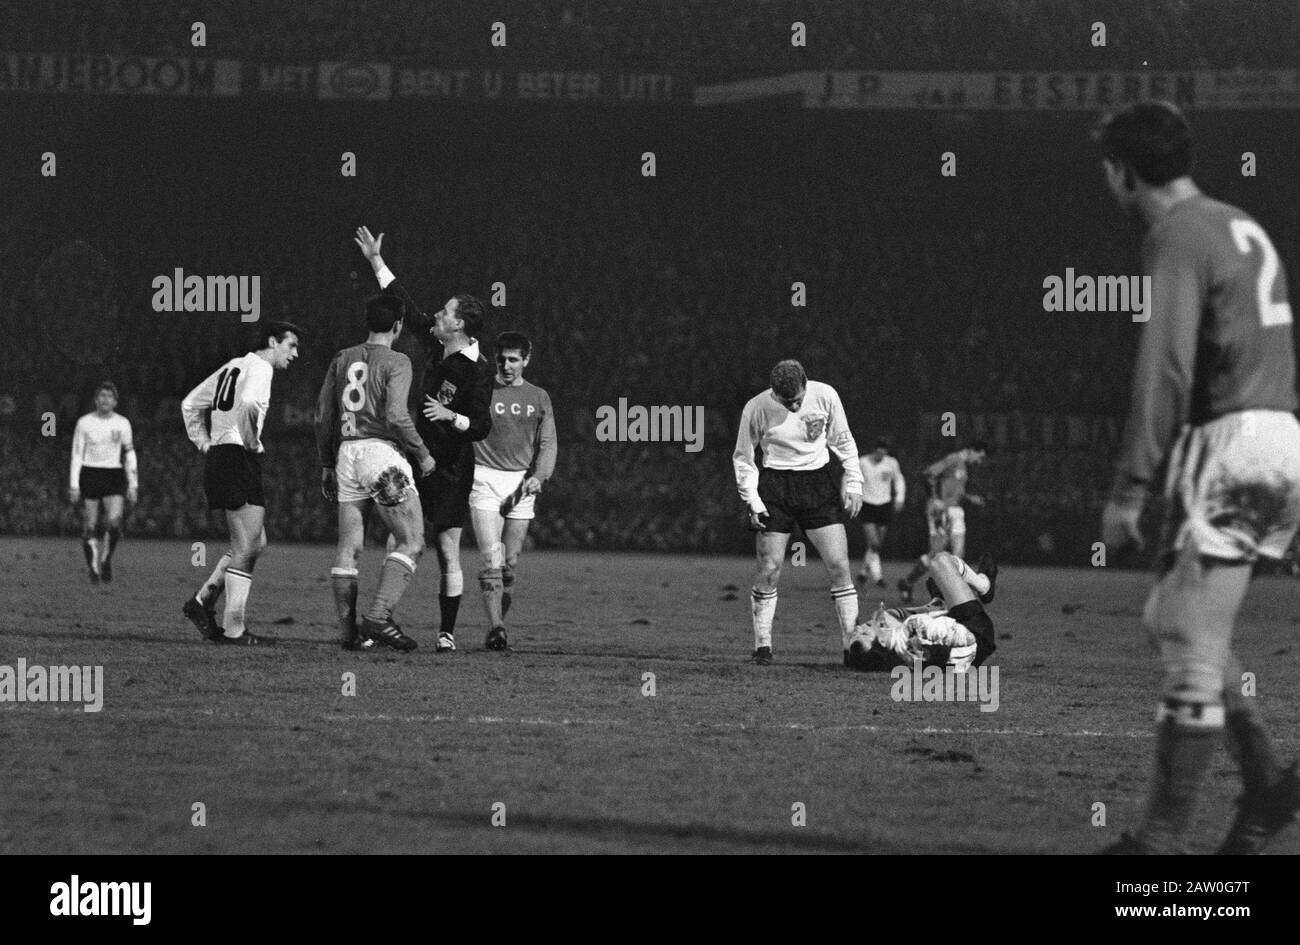 Netherlands against Russia 3-1 in Rotterdam. Number 9 Coen Moulijn duel Date: November 29, 1967 Location: Rotterdam, South Holland Keywords: sport, football Person Name: Moulijn Coen Stock Photo